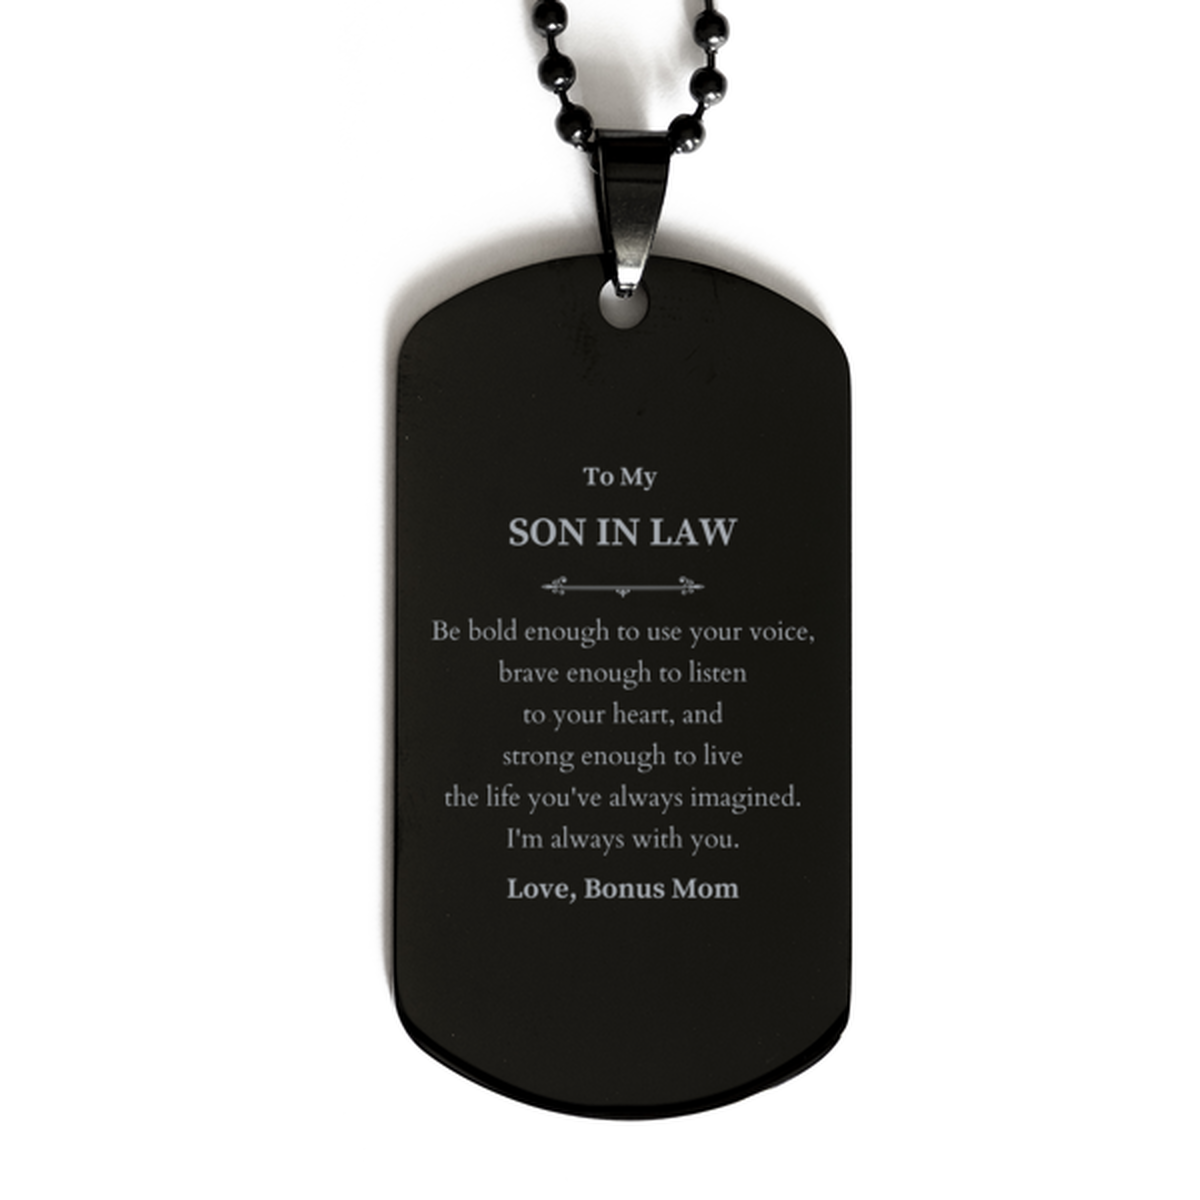 Keepsake Son In Law Black Dog Tag Gift Idea Graduation Christmas Birthday Son In Law from Bonus Mom, Son In Law Be bold enough to use your voice, brave enough to listen to your heart. Love, Bonus Mom